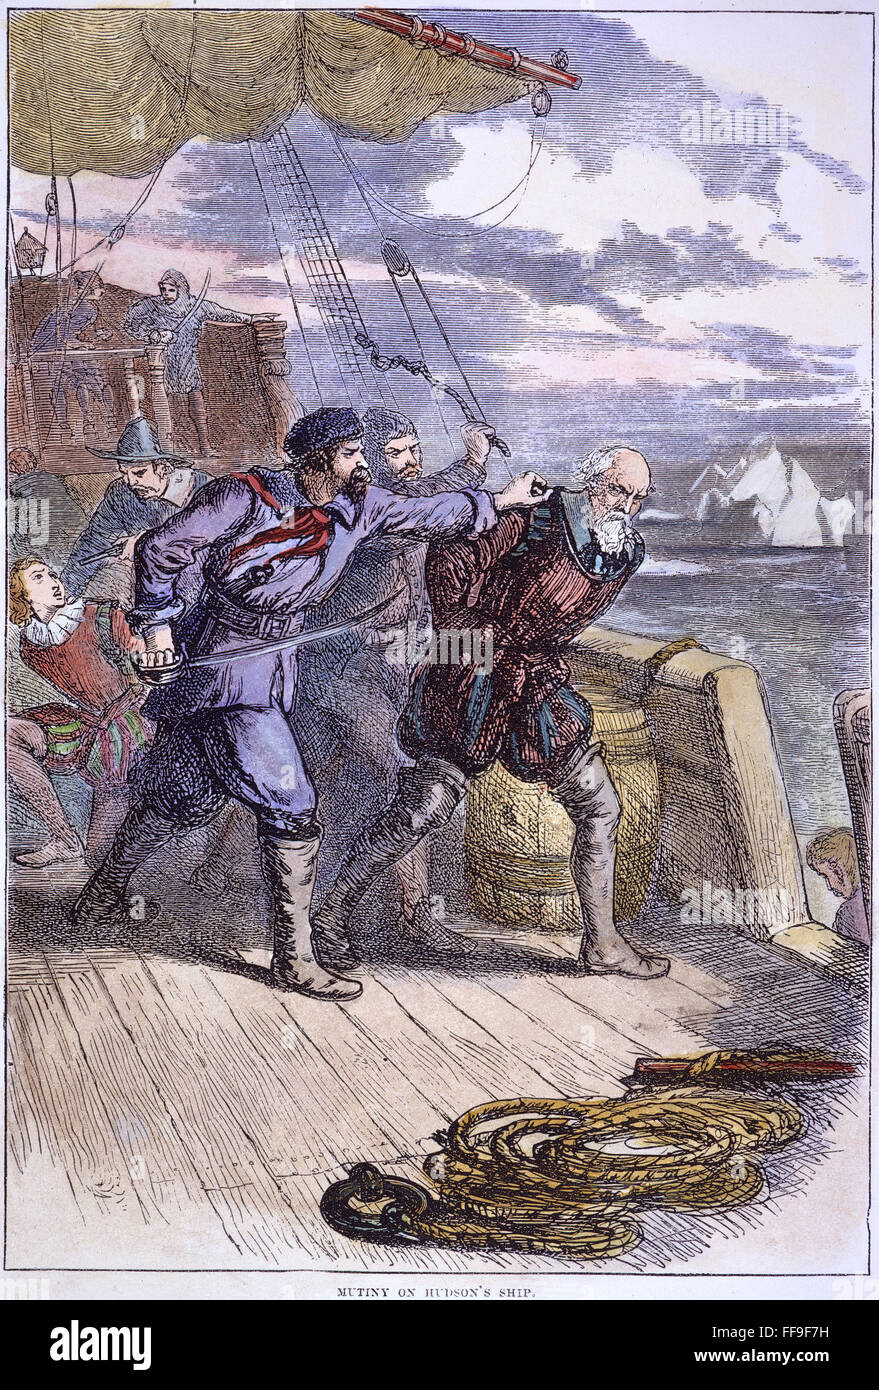 HUDSON: MUTINY, 1611. /nThe mutiny of the Discovery crew against Henry Hudson at present-day Hudson Bay, Canada, June 1611: wood engraving, 19th century. Stock Photo